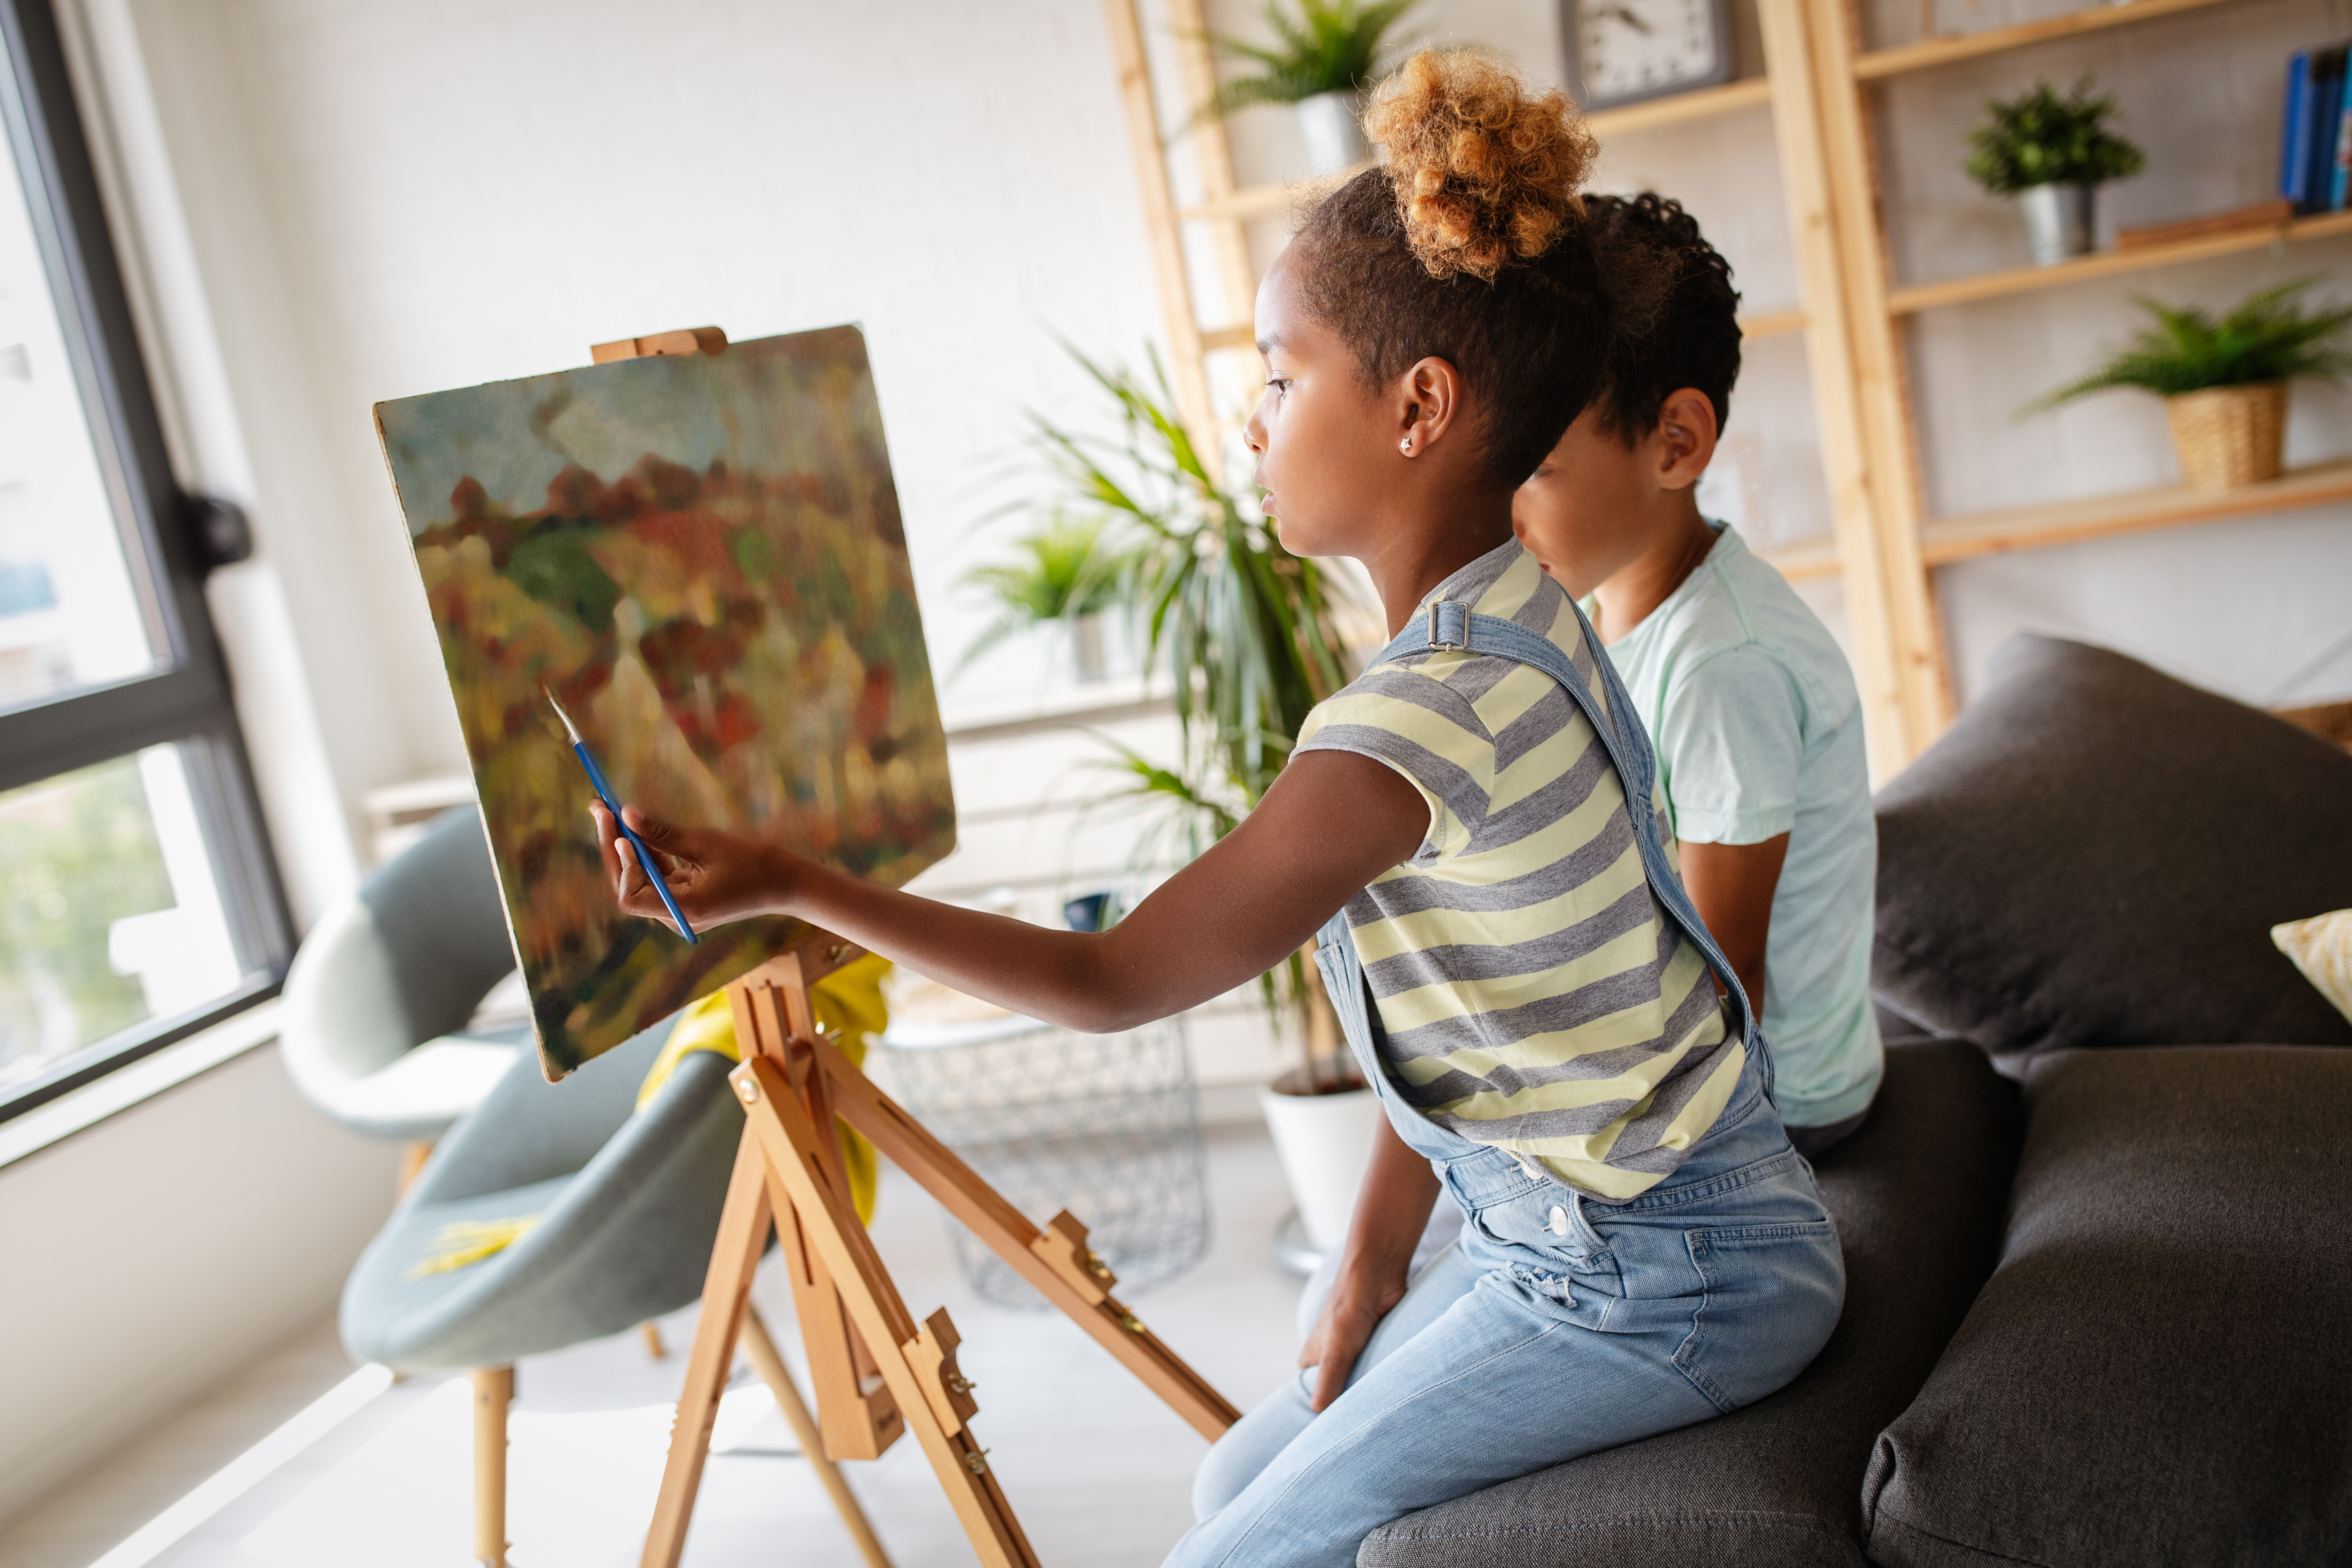 Young girls sits and paints at an easel in her home